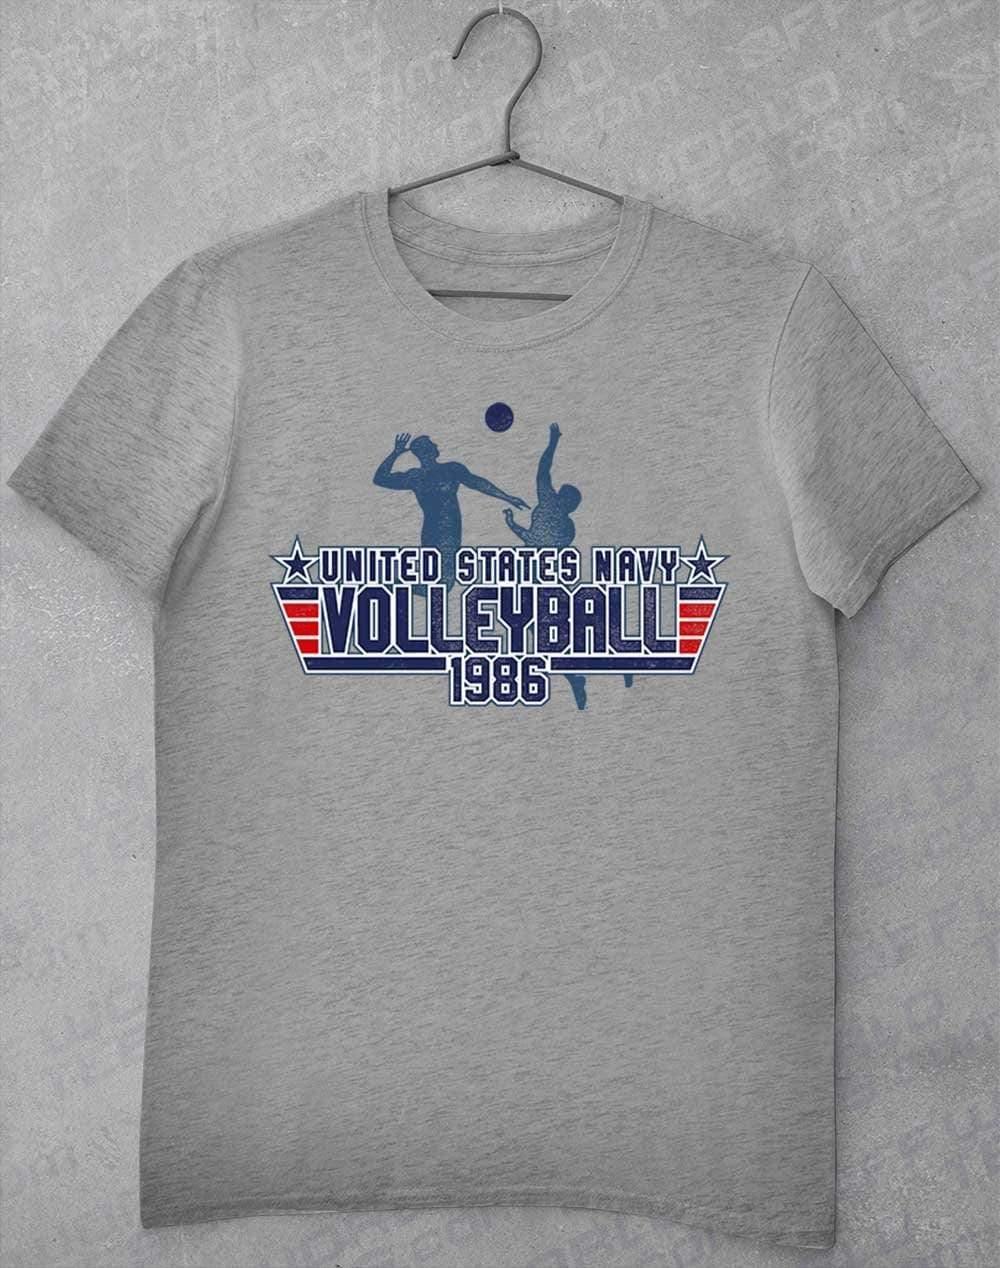 US Navy Volleyball 1986 T-Shirt S / Heather Grey  - Off World Tees